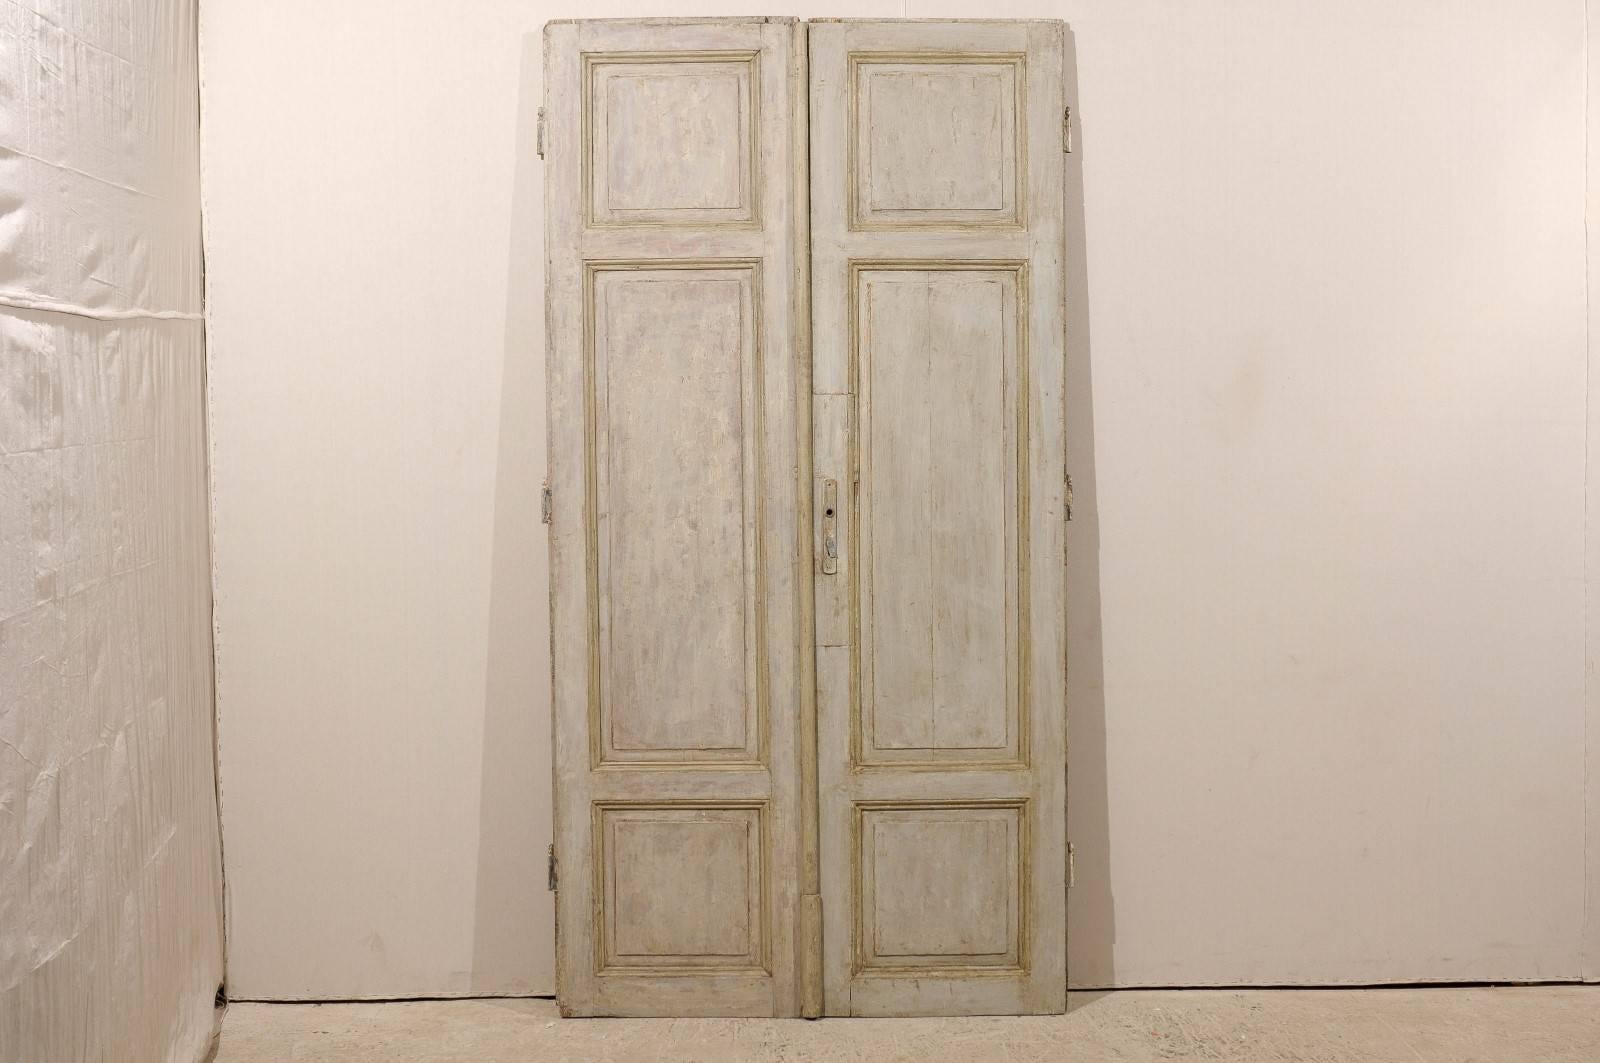 A pair of tall French doors from the mid-19th century. These French doors feature a grey green finish with wood coming through. They are made of three carved panels. They would be perfect on rails to separate rooms.